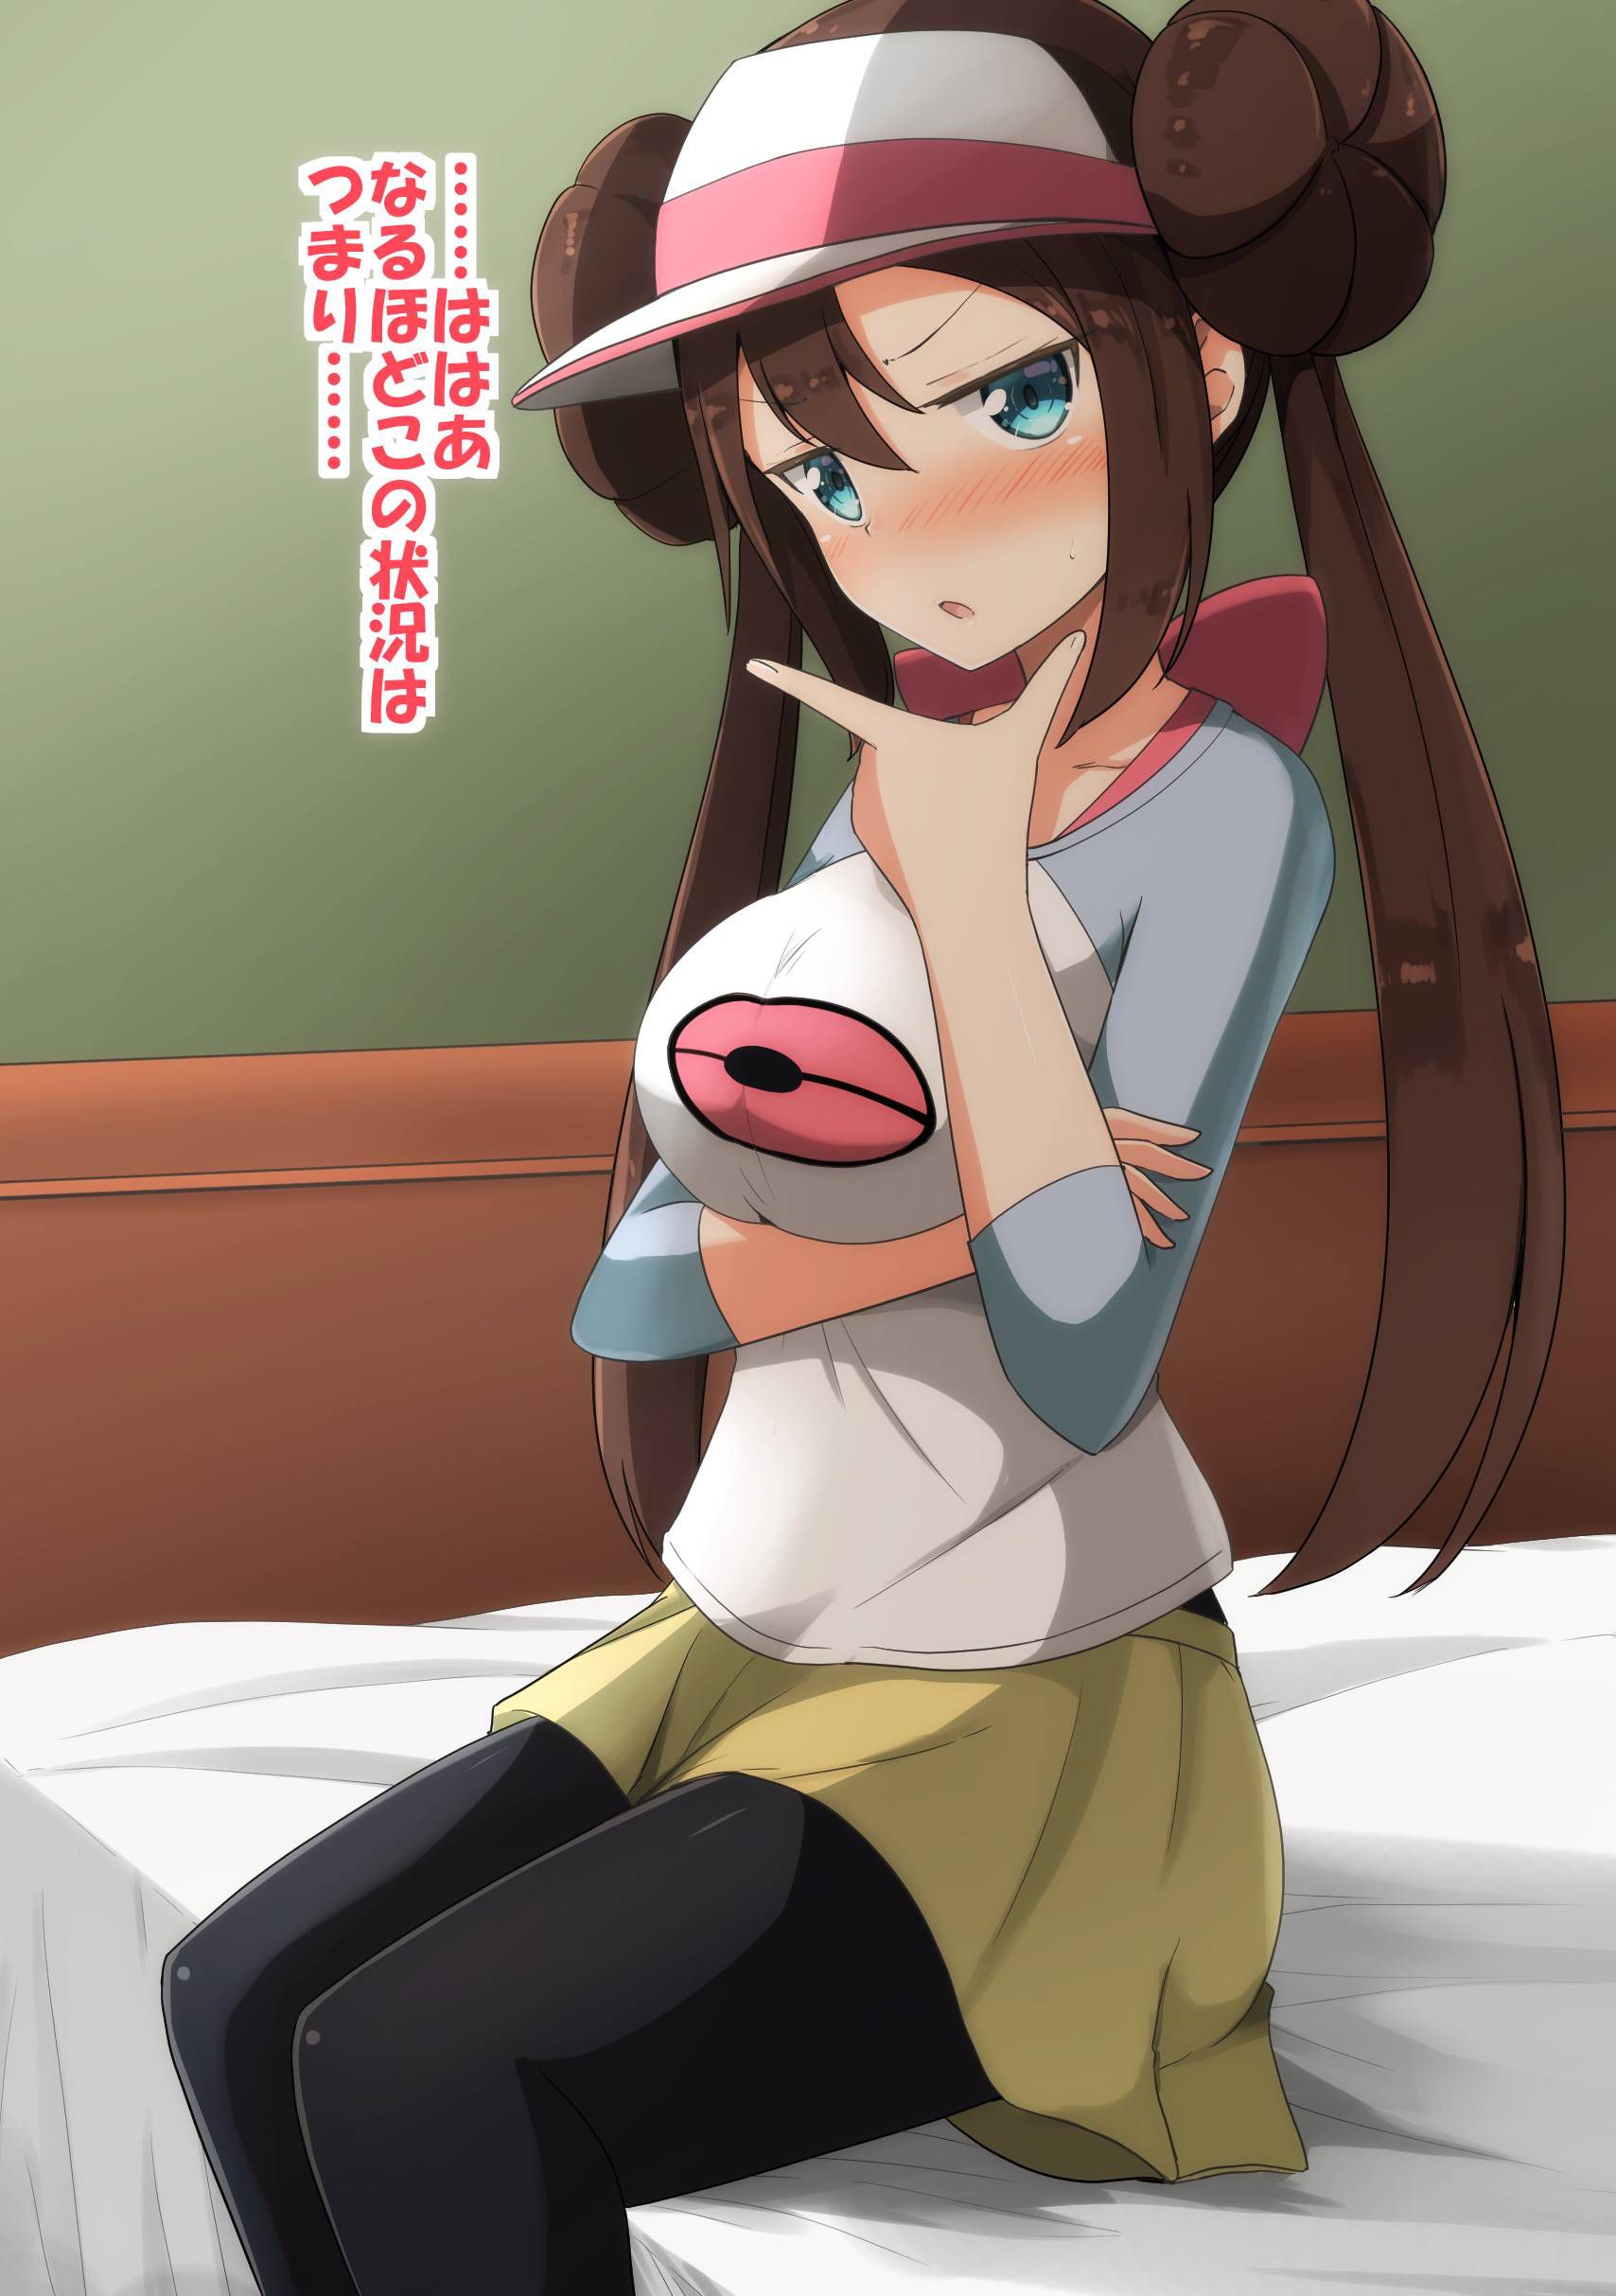 [Secondary Erotic] Pocket Monster (Pokemon Masters) trainer, Mei-chan's image summary No.04 [20 sheets] 19